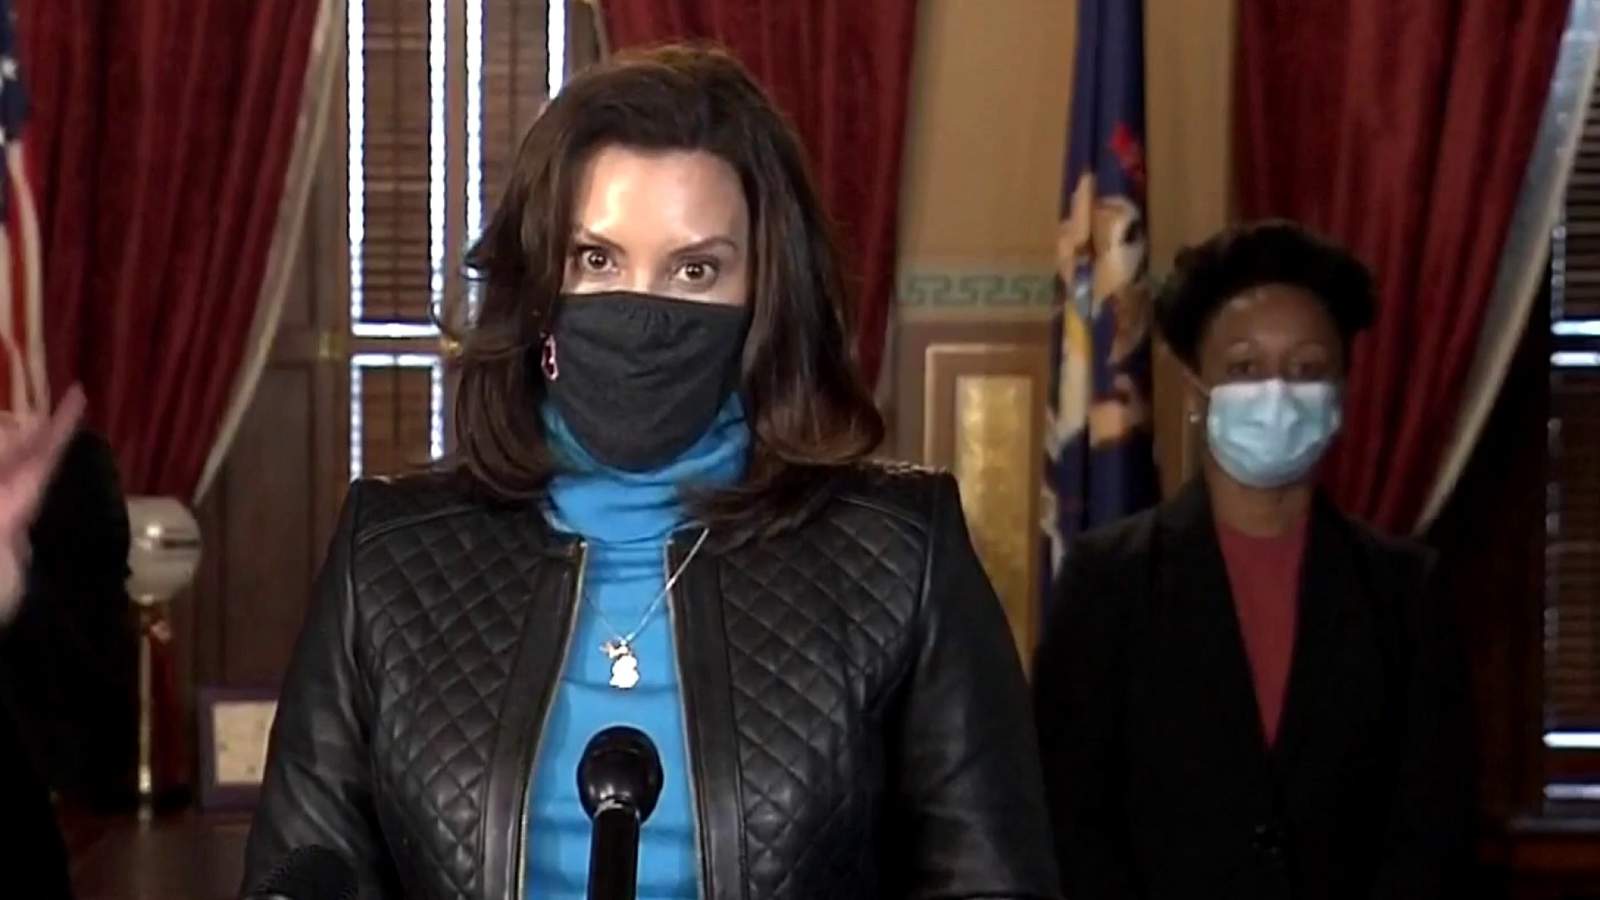 11 takeaways from Michigan Gov. Whitmer’s update on COVID-19 in Michigan